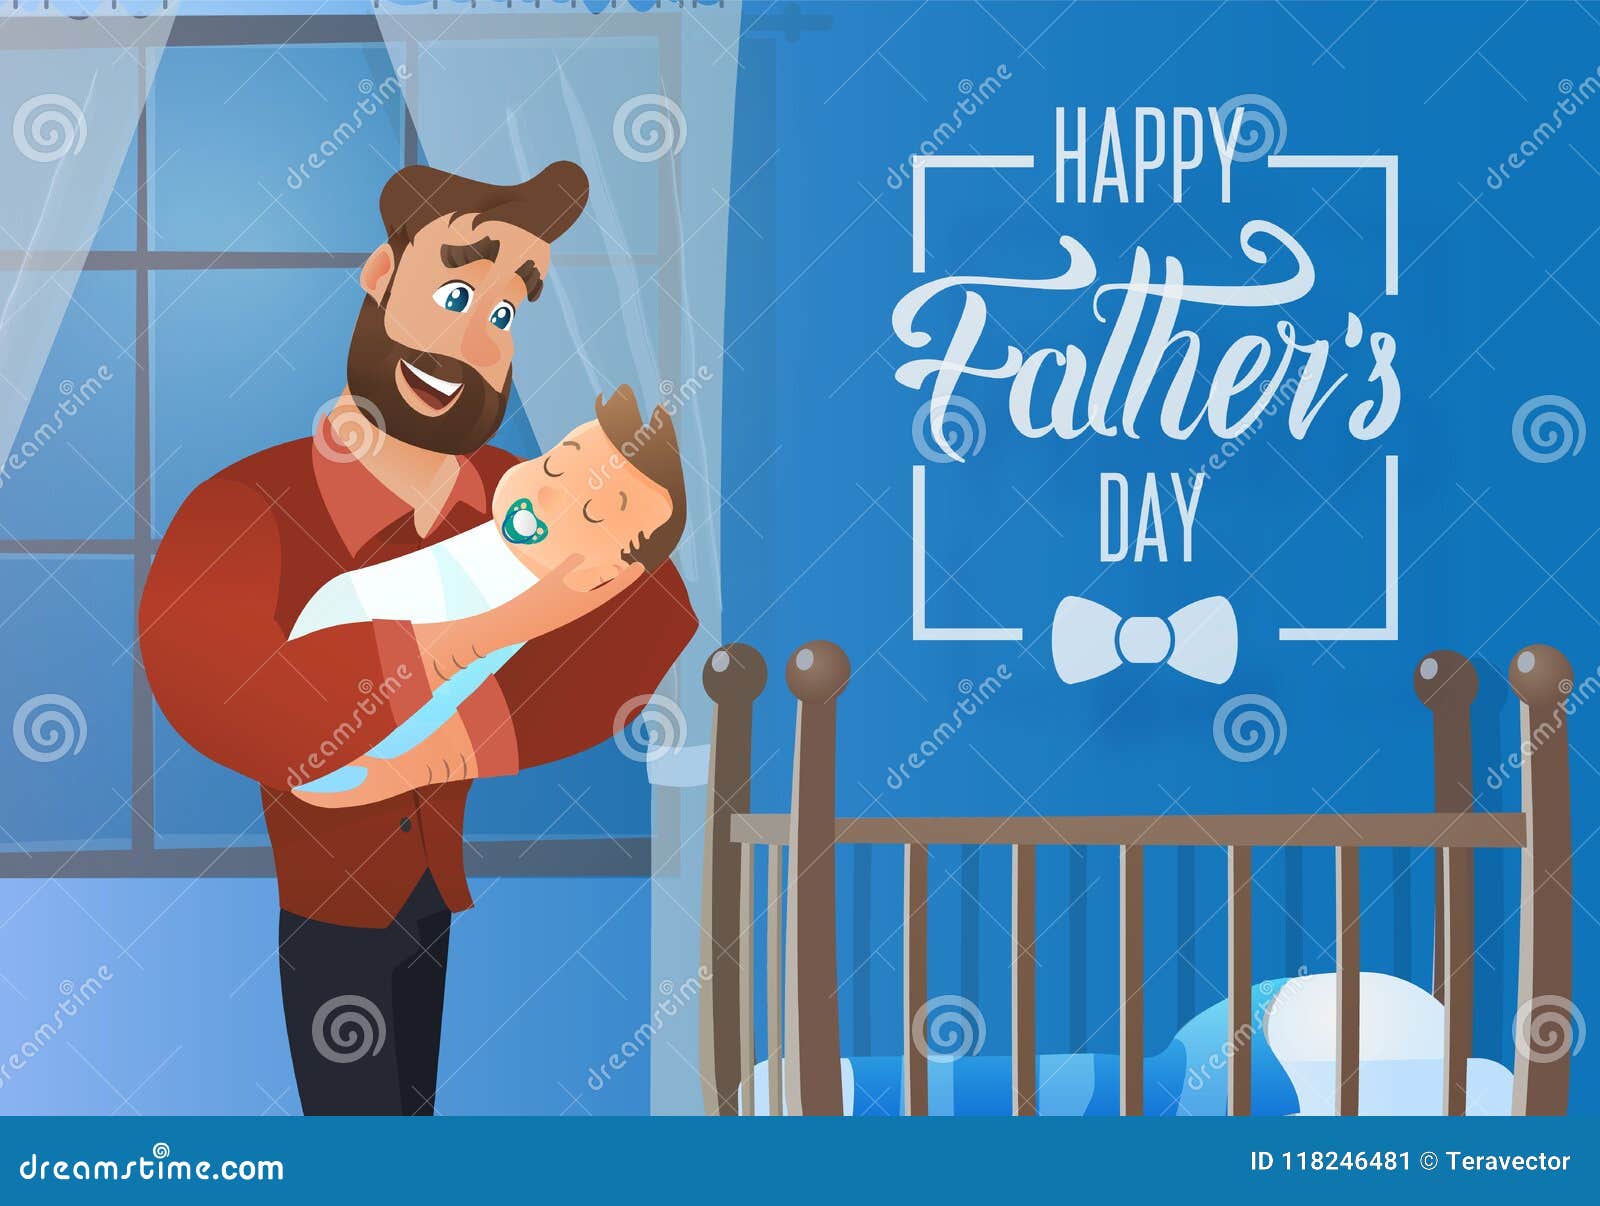 Happy Fathers Day Cartoon Vector Greeting Card Stock Vector ...